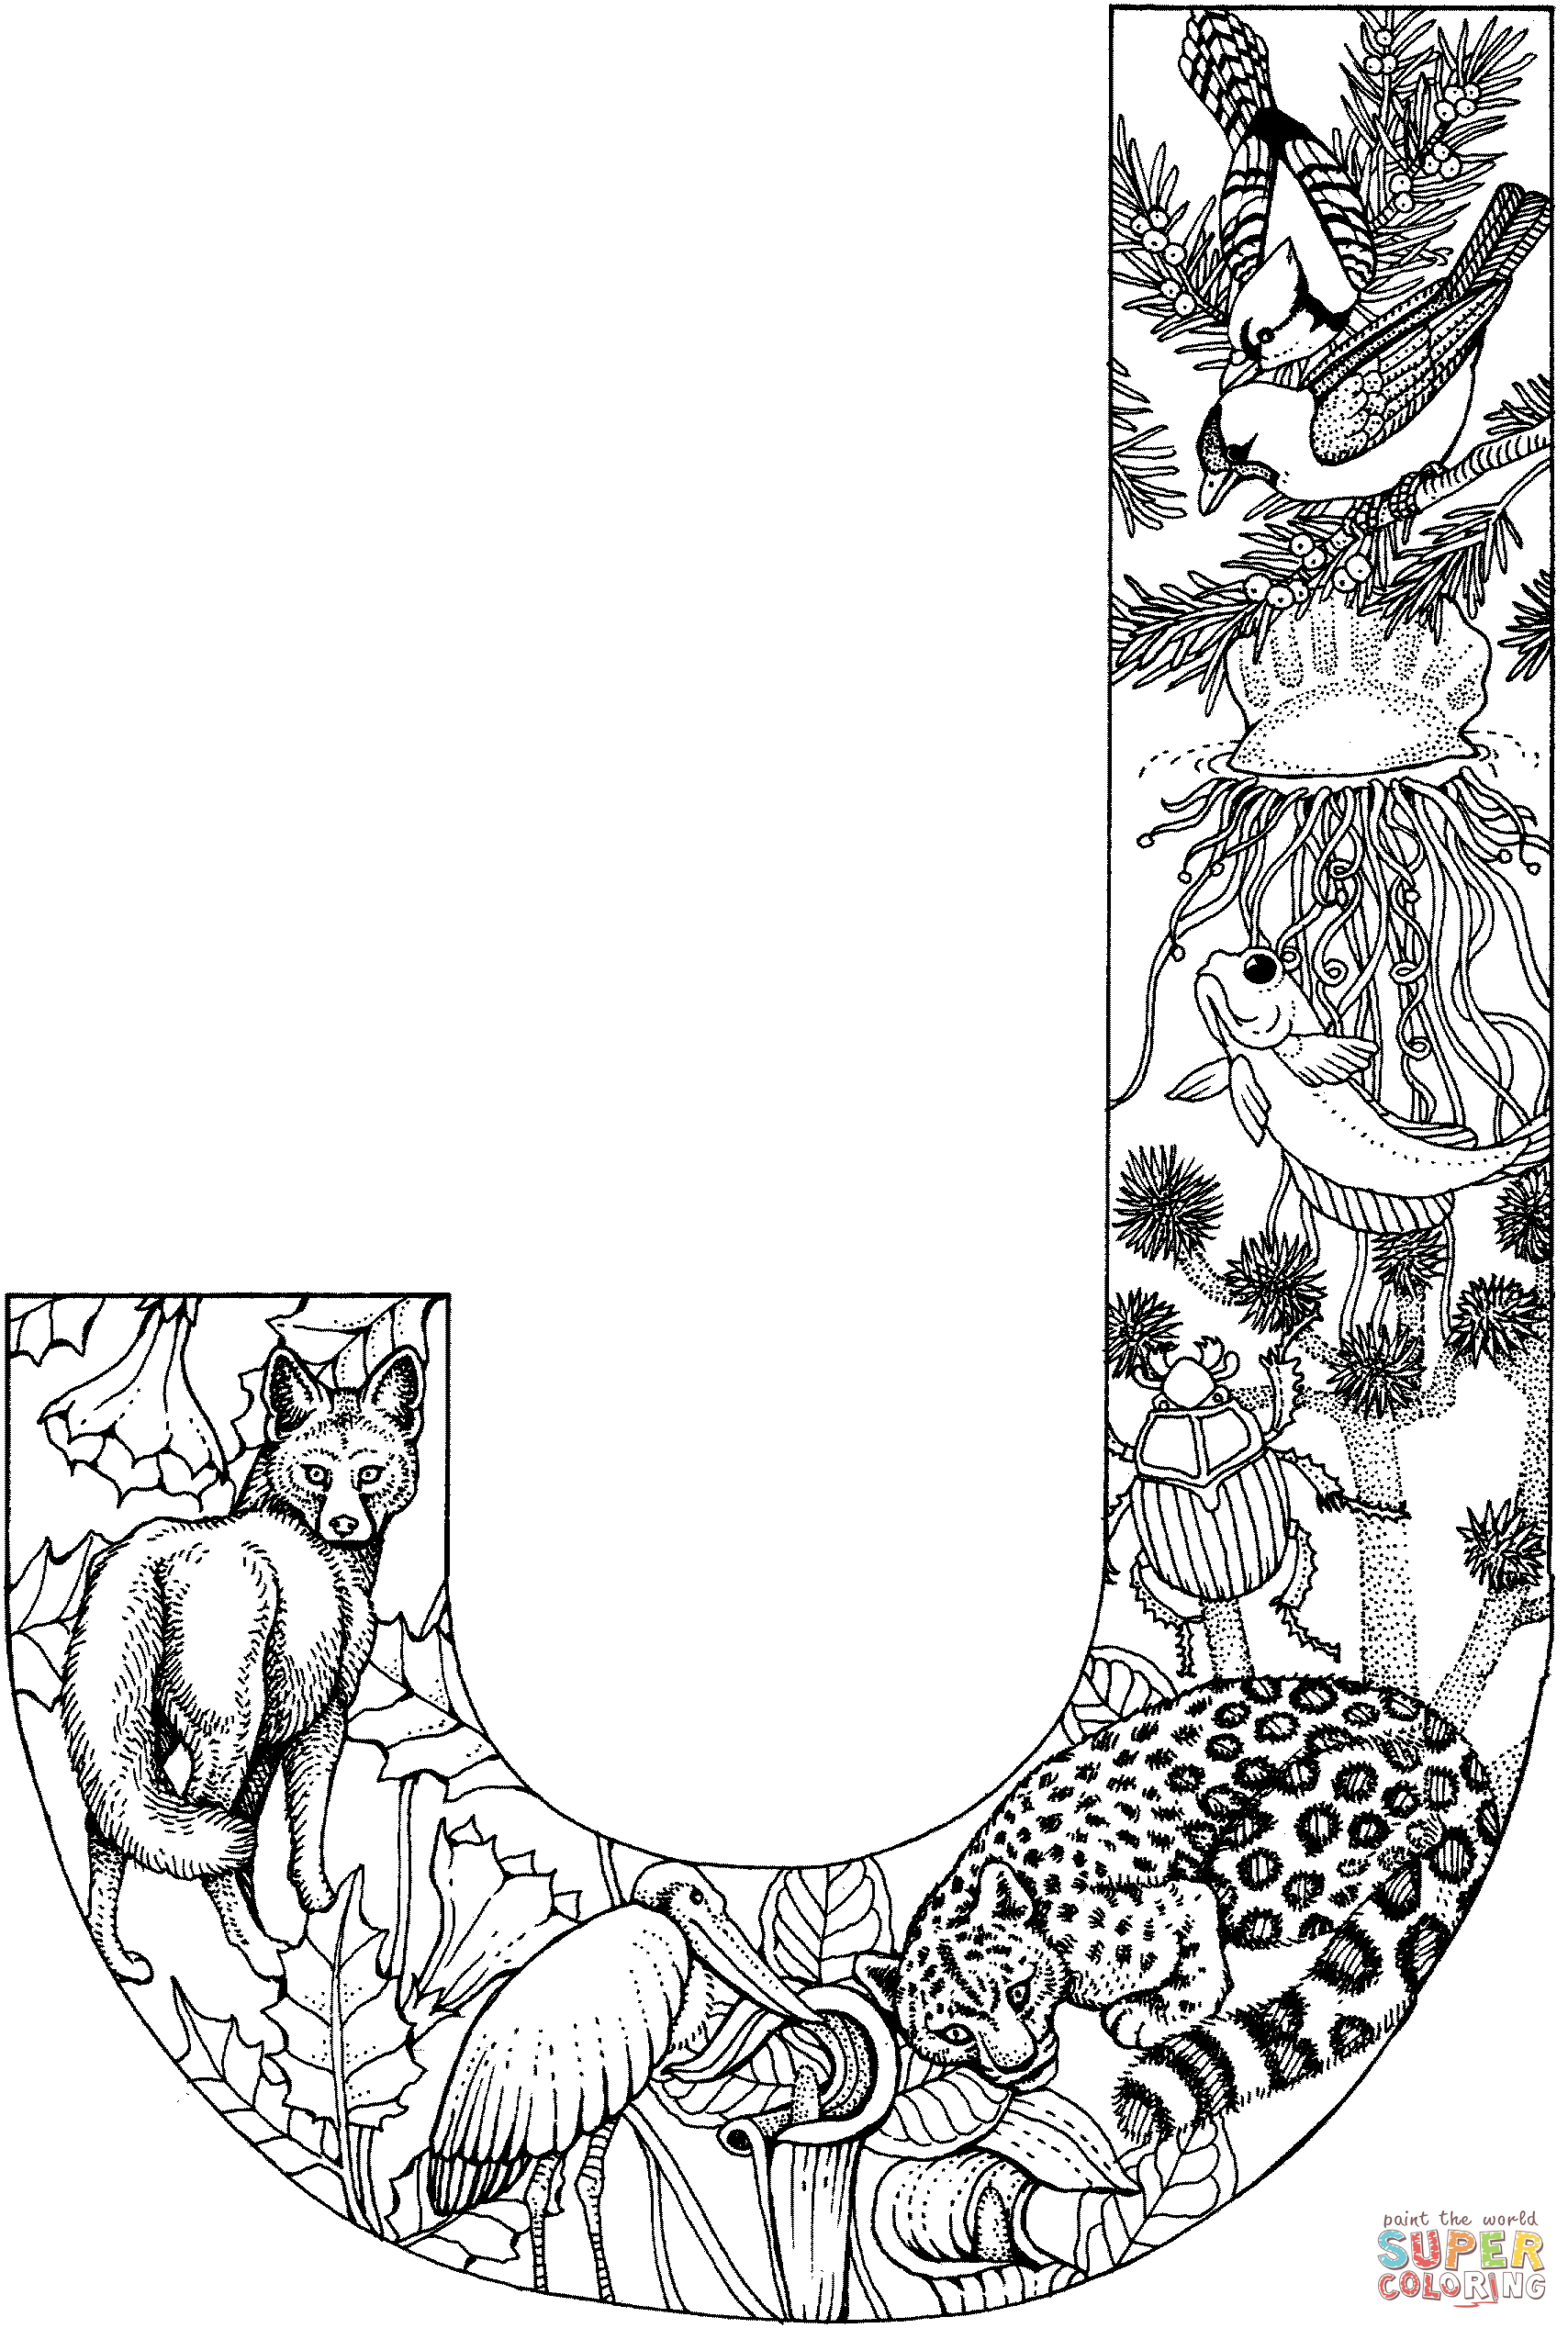 Coloring Pages Of J Letter J With Animals Coloring Page Free Printable Coloring Pages